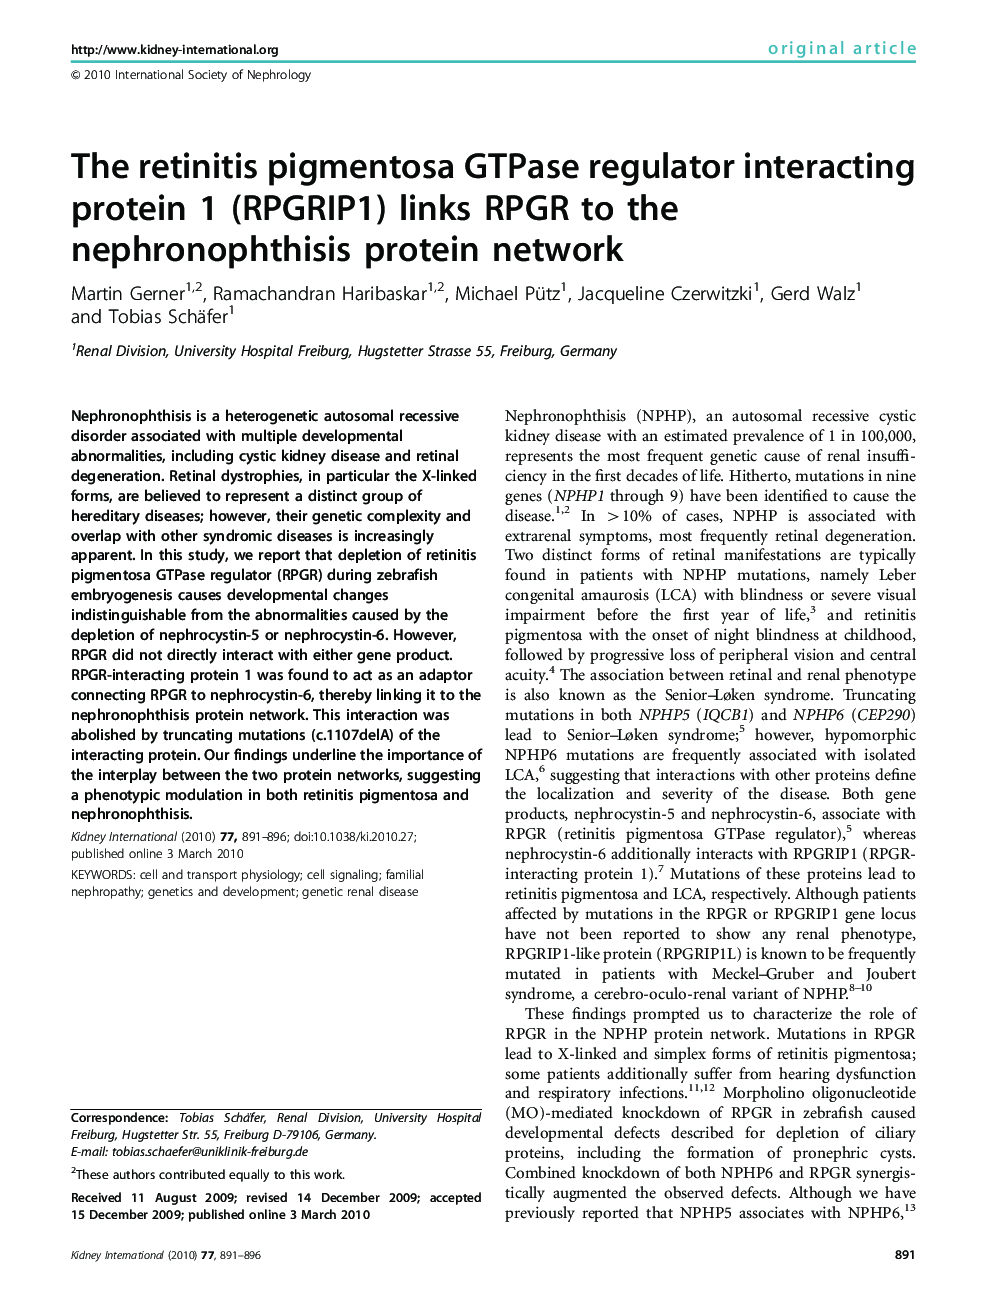 The retinitis pigmentosa GTPase regulator interacting protein 1 (RPGRIP1) links RPGR to the nephronophthisis protein network 